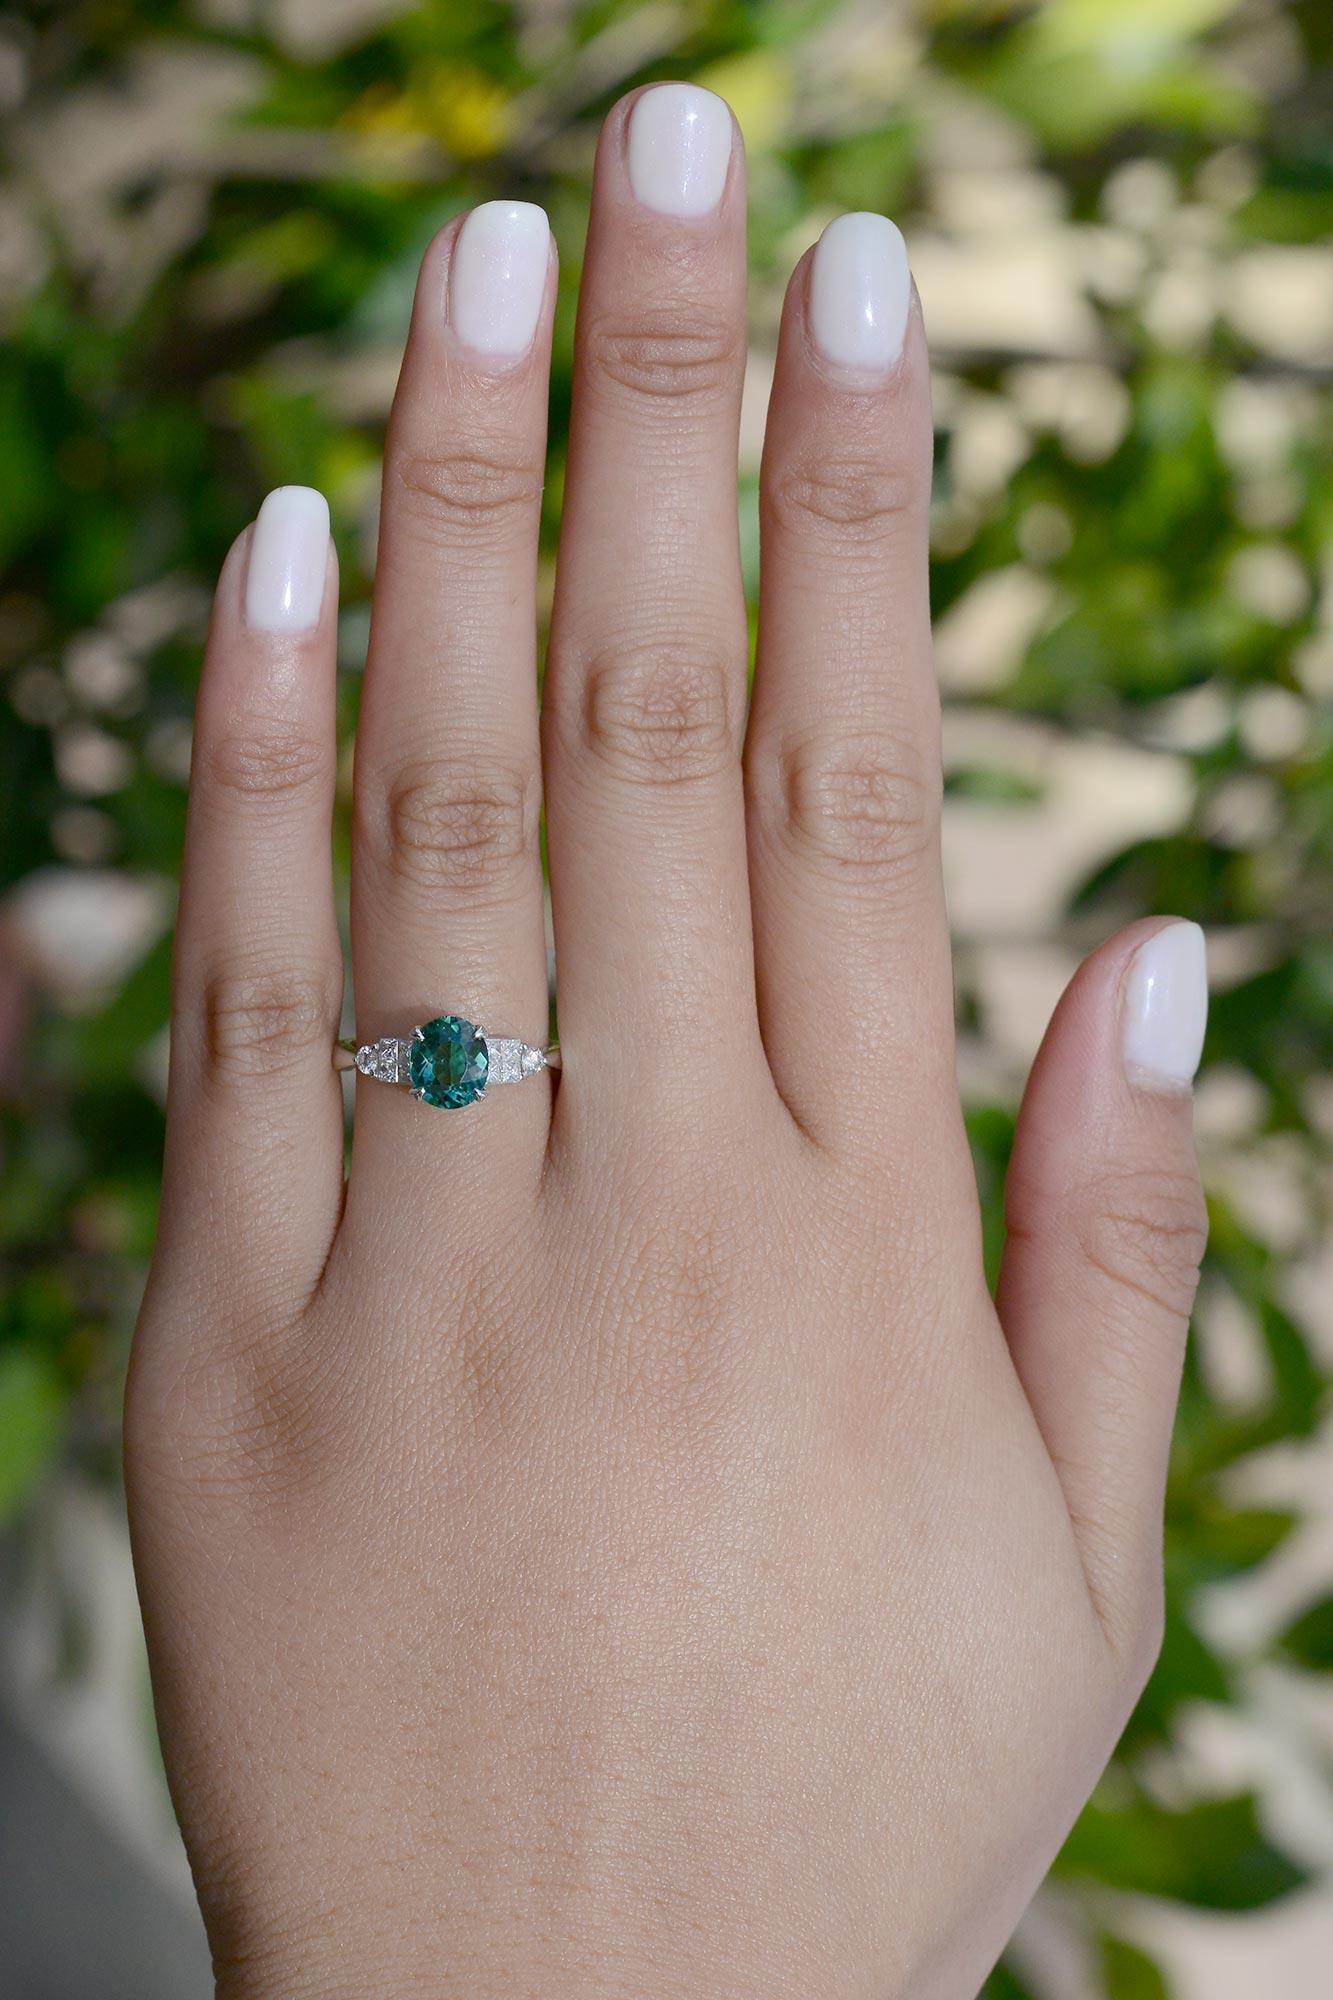 A rare and captivating blue-green (Indicolite) tourmaline gemstone engagement ring. The classic, staircase design 18kt. white gold setting featuring princess and round diamond accents creating a simple and clean look that sits low on your